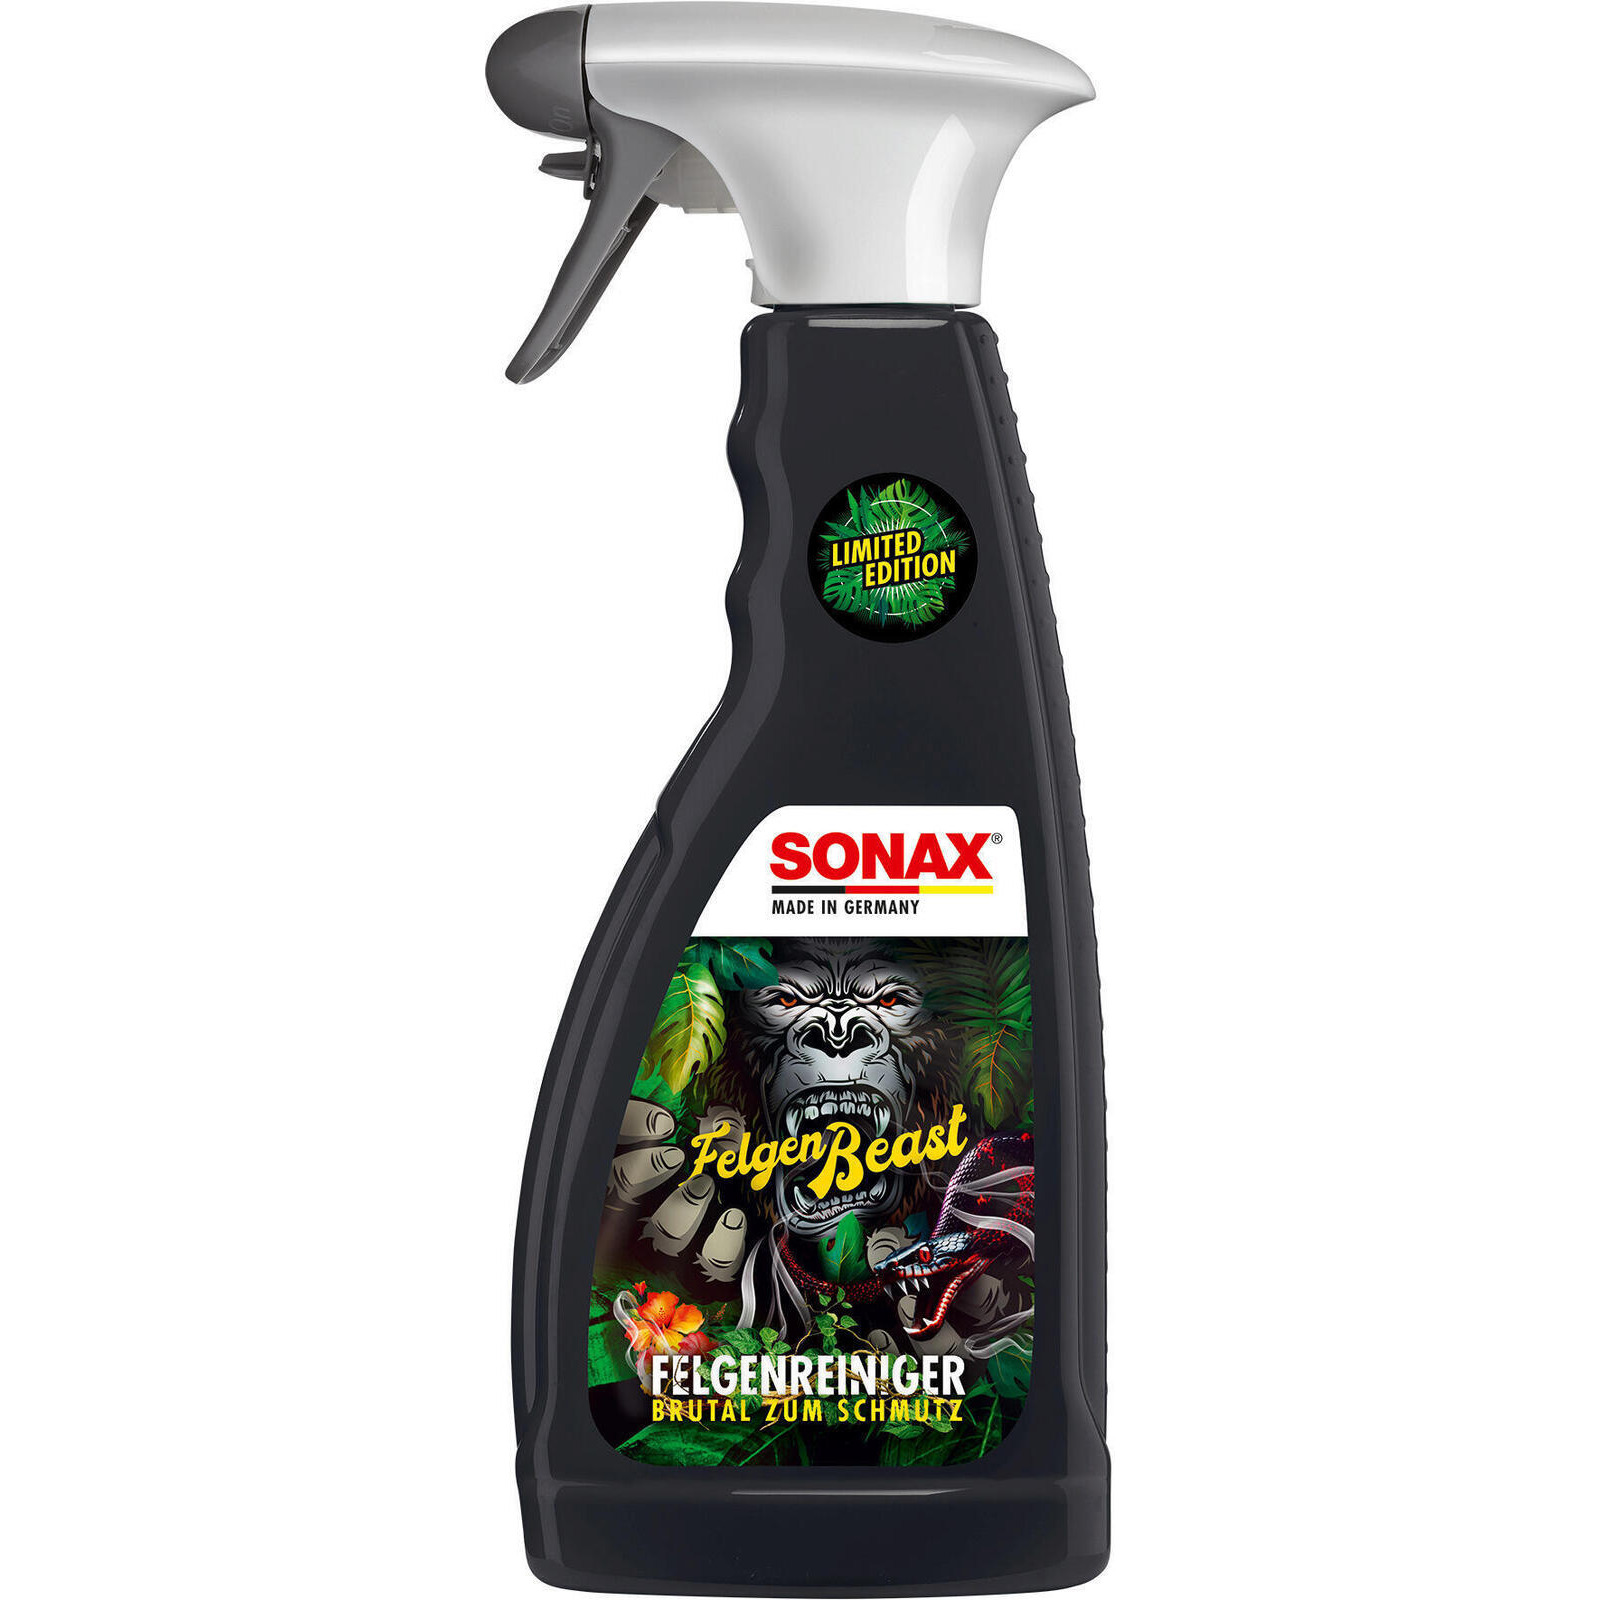 SONAX Rim Cleaner Beast Wheel Cleaner special edition 2023